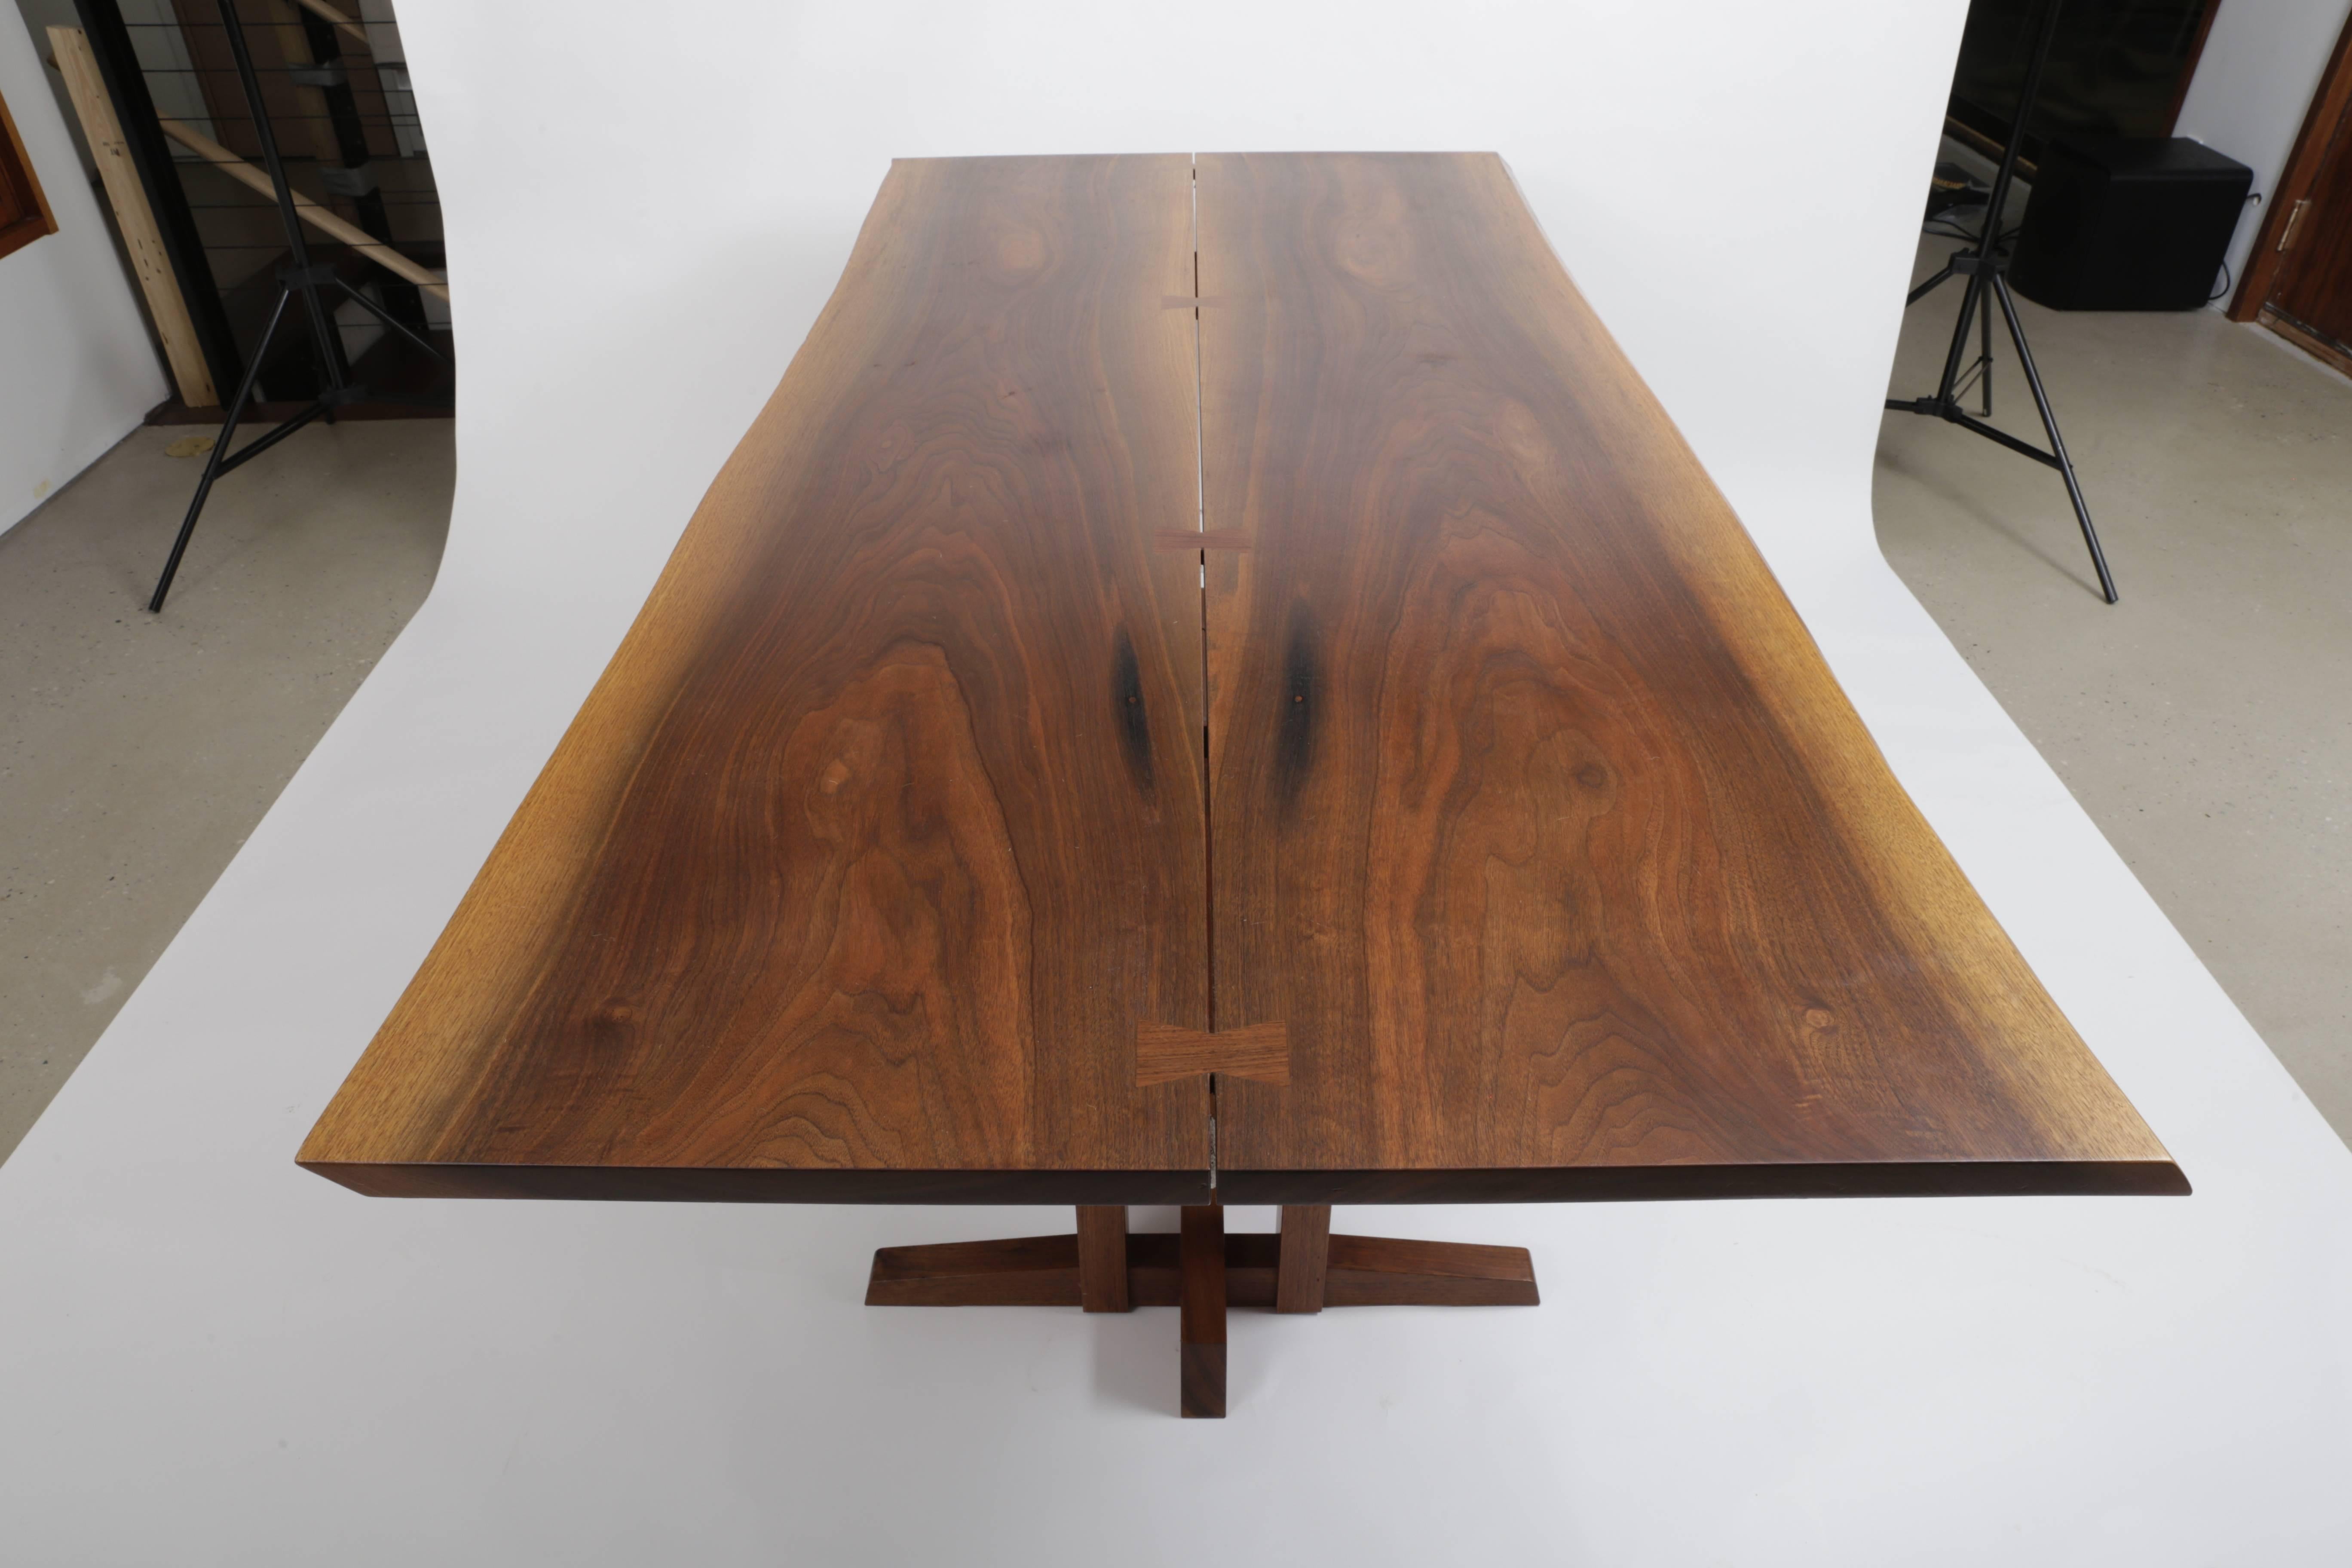 American Walnut Frenchmans Cove Dinning Table by George Nakashima